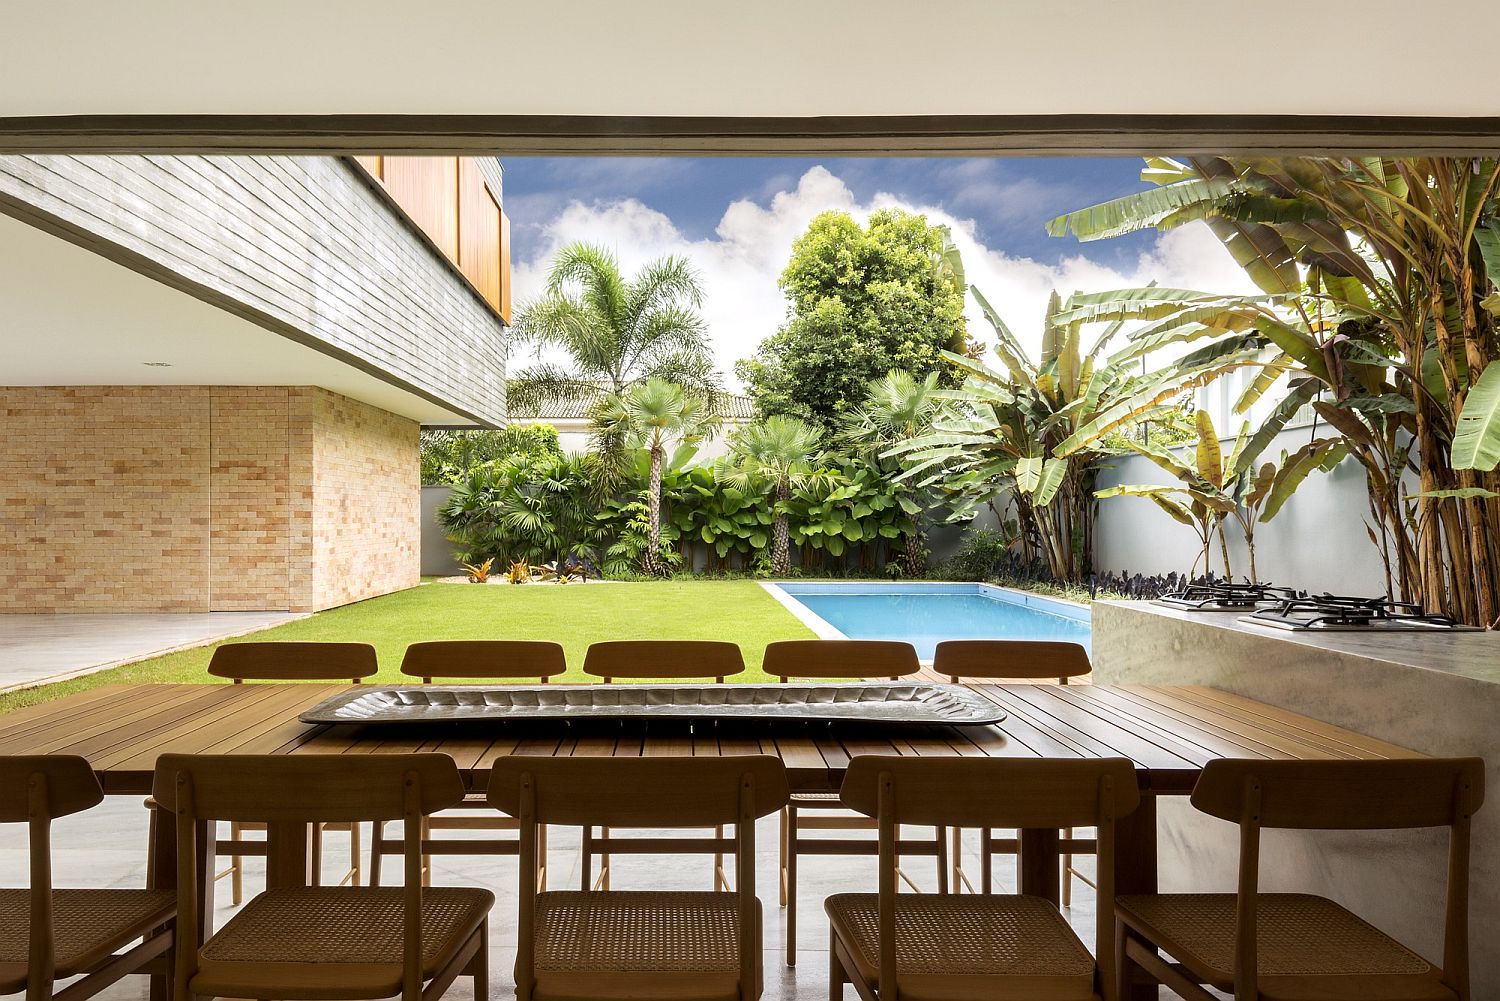 Garden and pool area of the Brazilian home